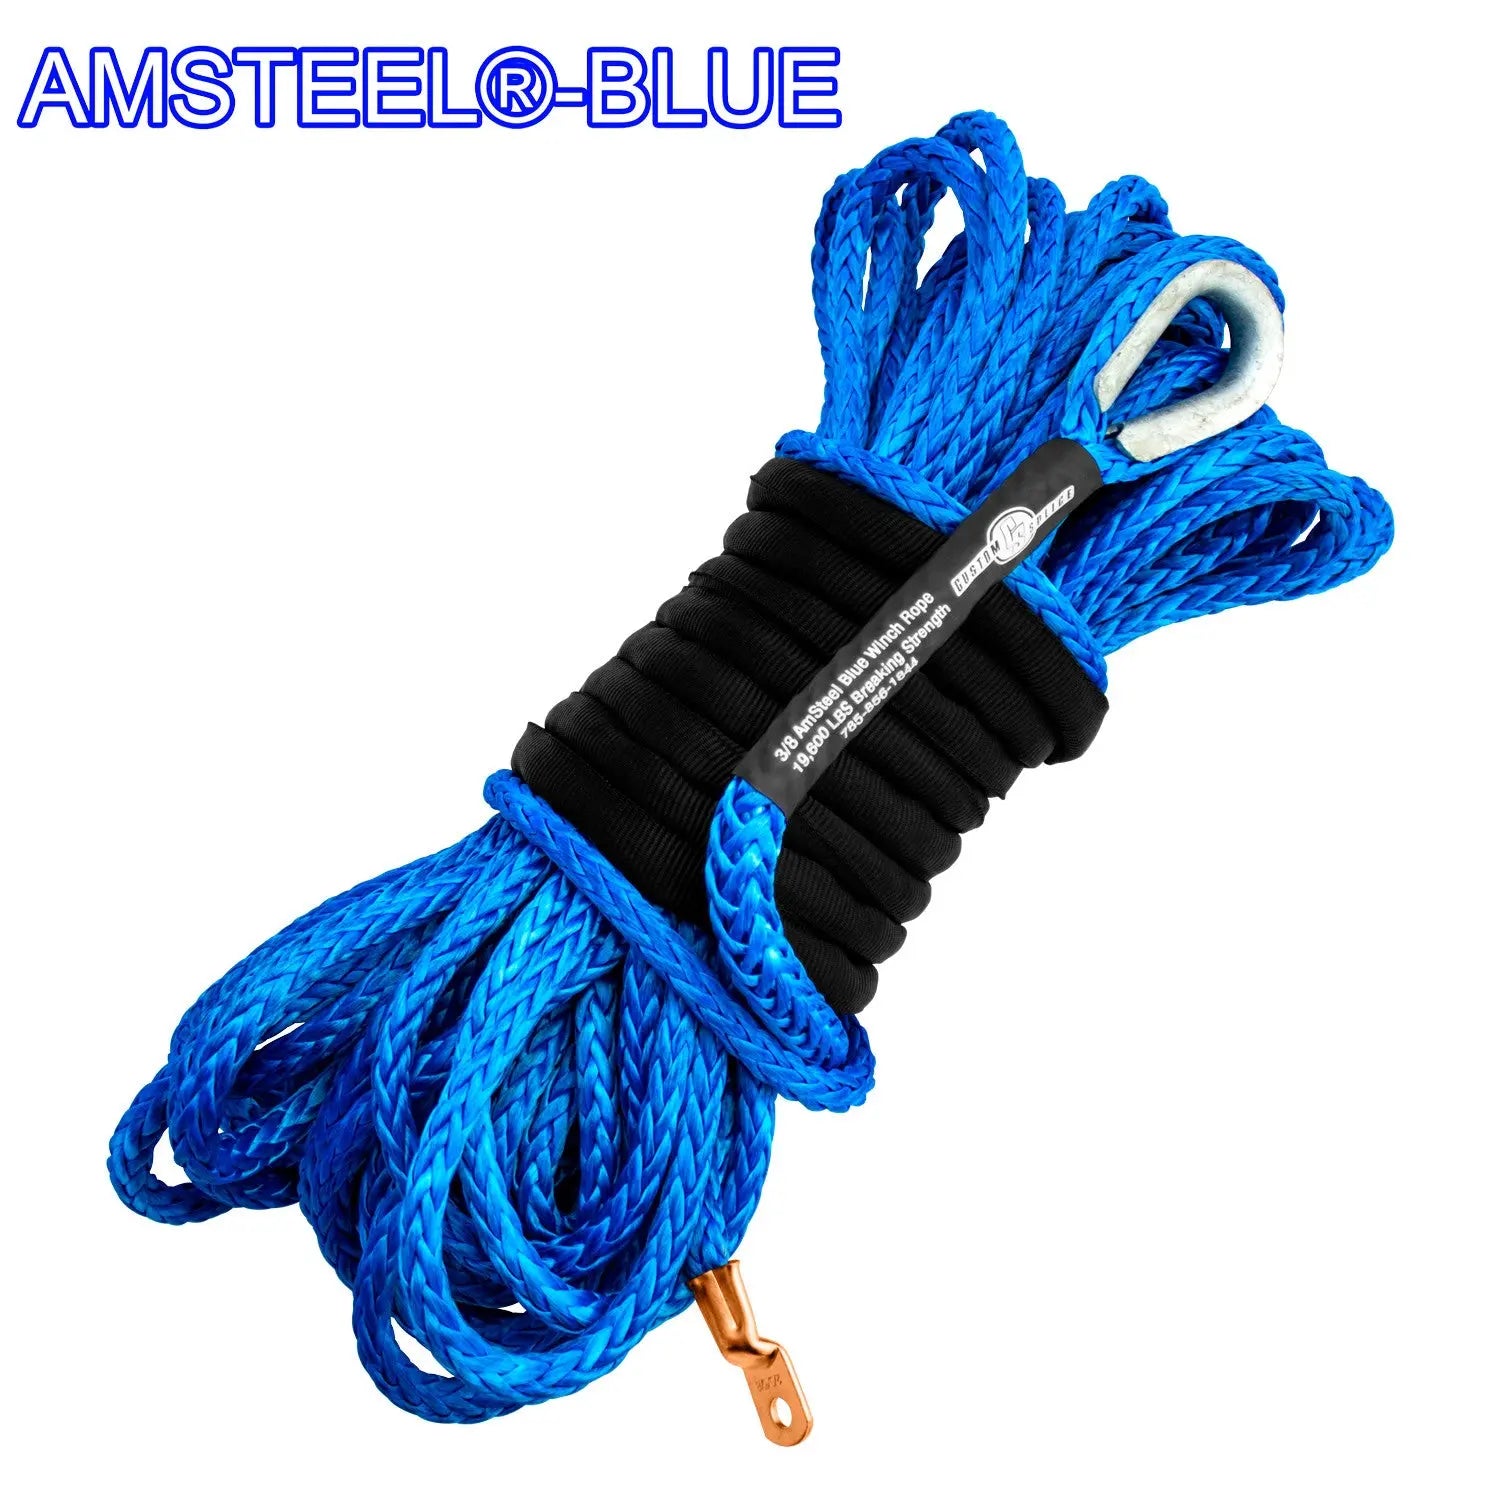 1/2' Amsteel Blue Synthetic Rope Winch Cable with Self Locking Hook